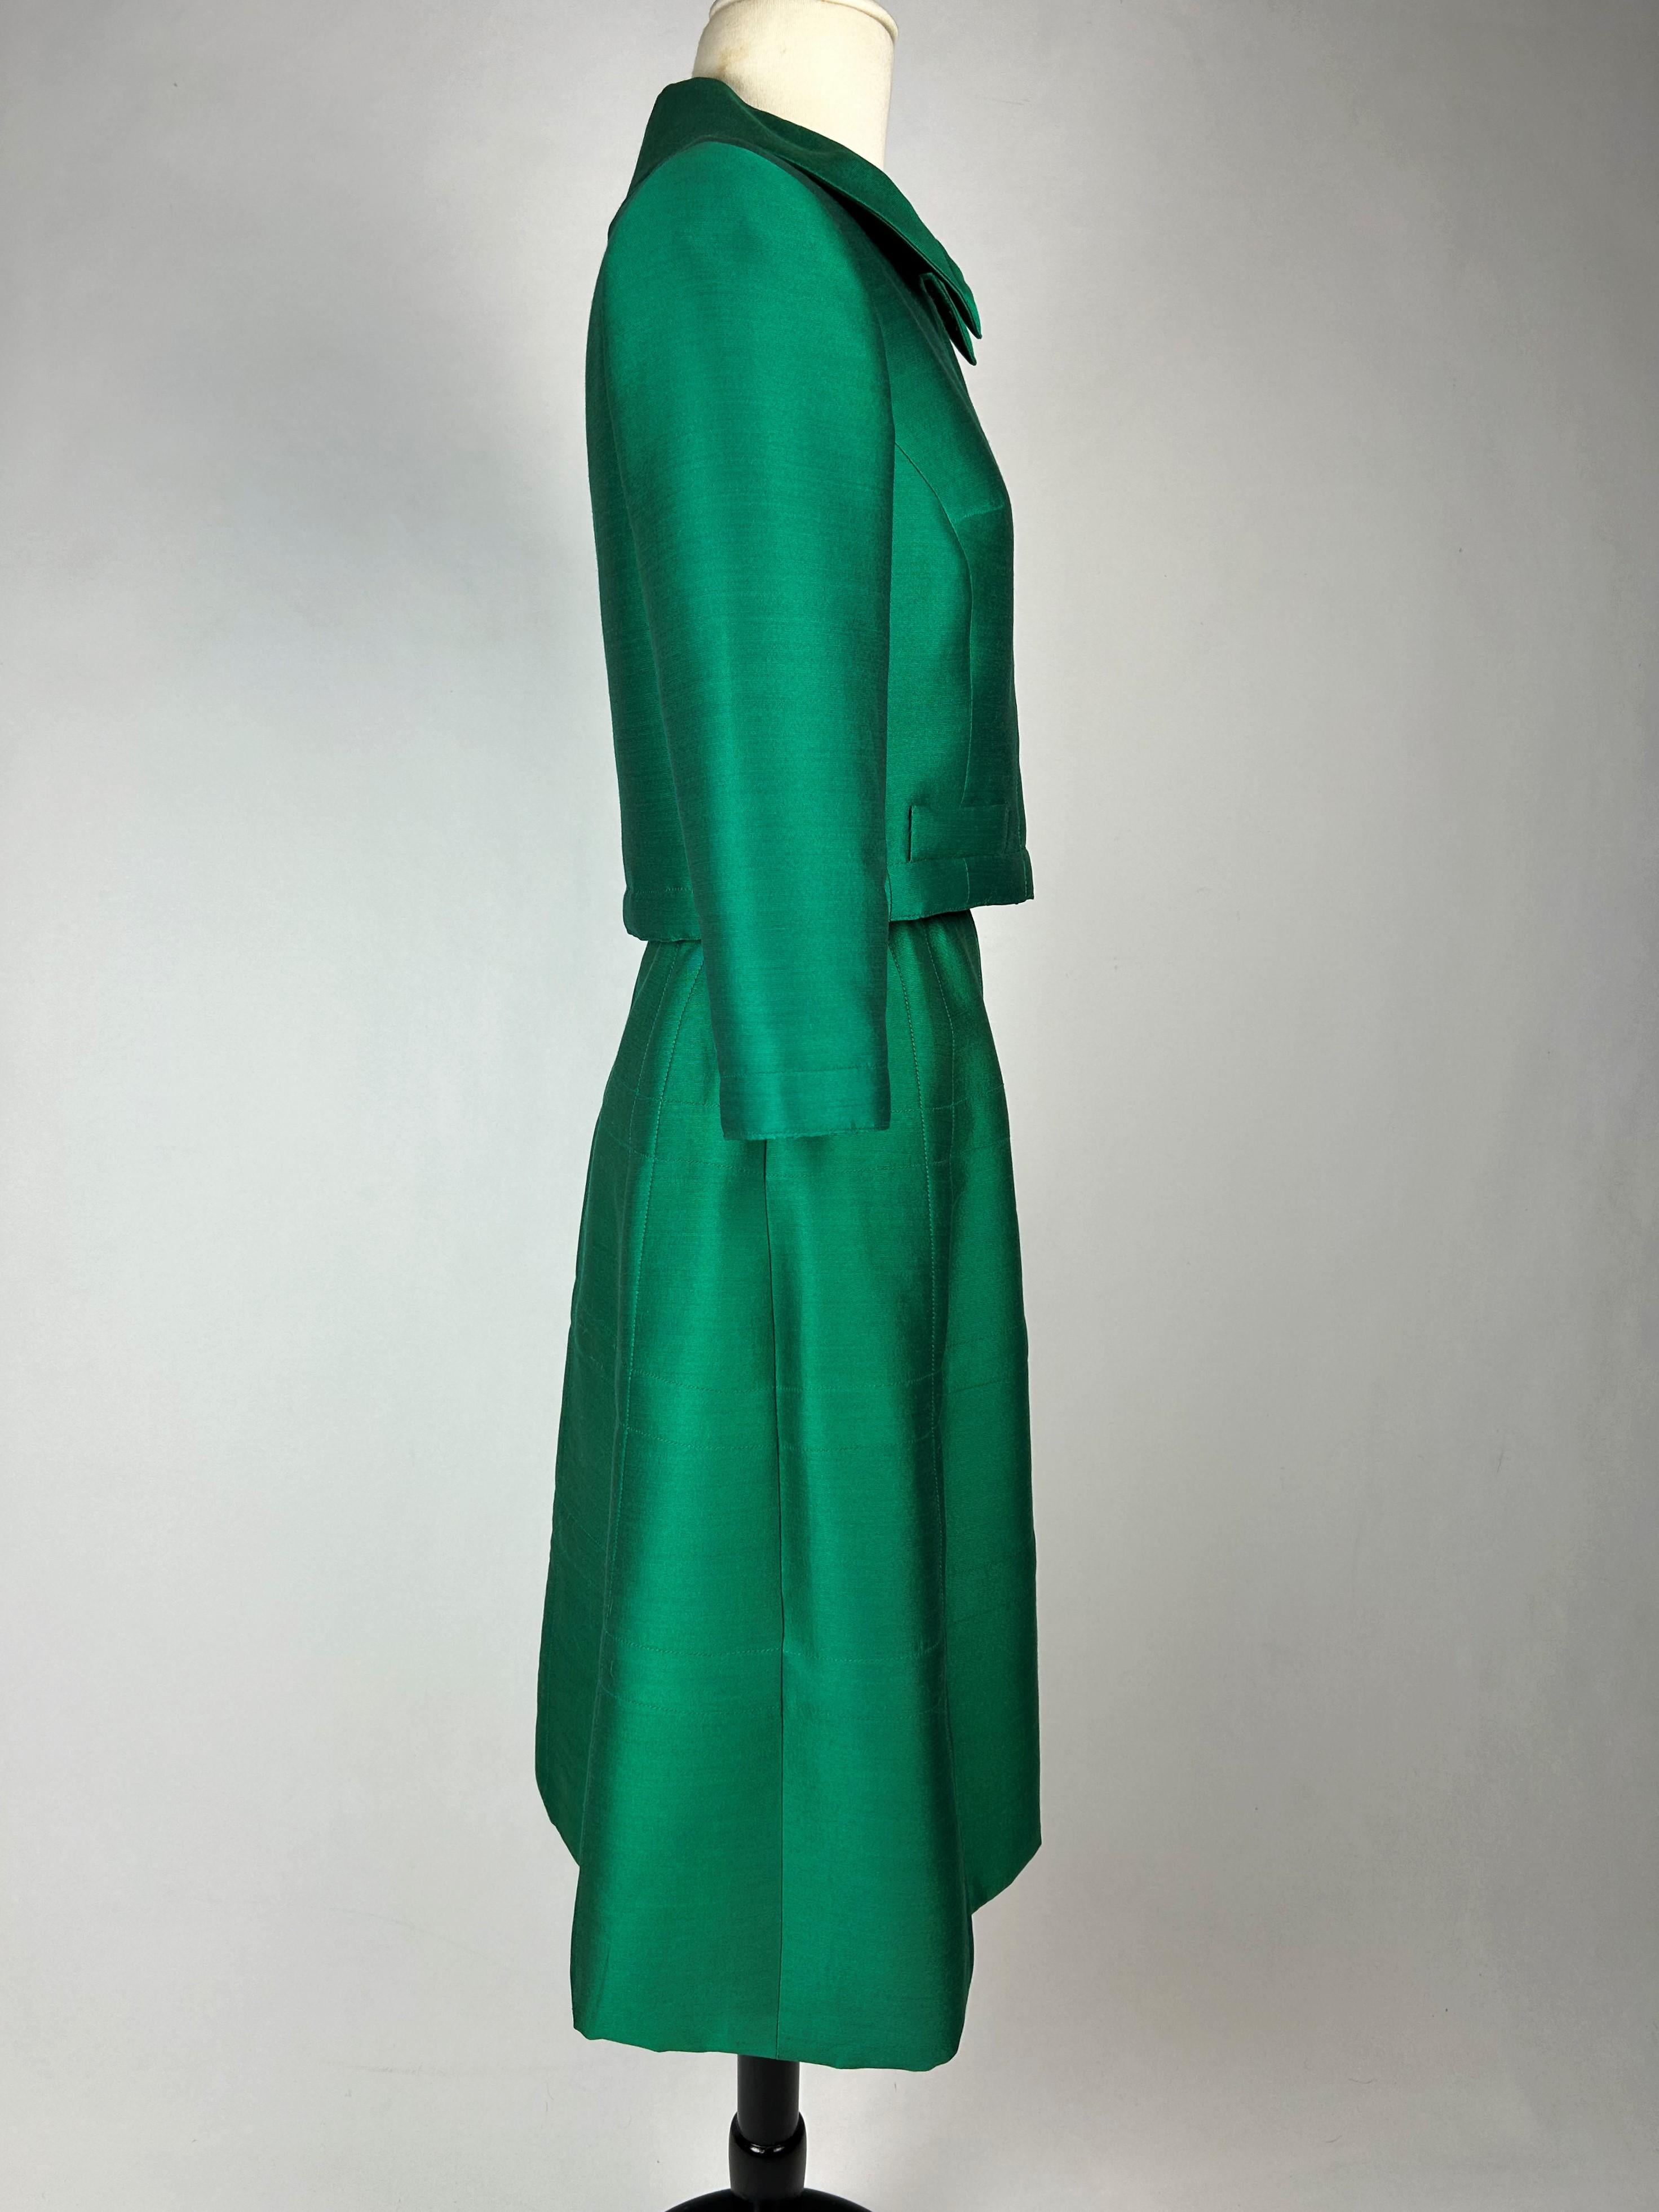 An Emerald Gazar Demi-Couture Skirt Suit by Louis Féraud Circa 1968-1972 For Sale 10